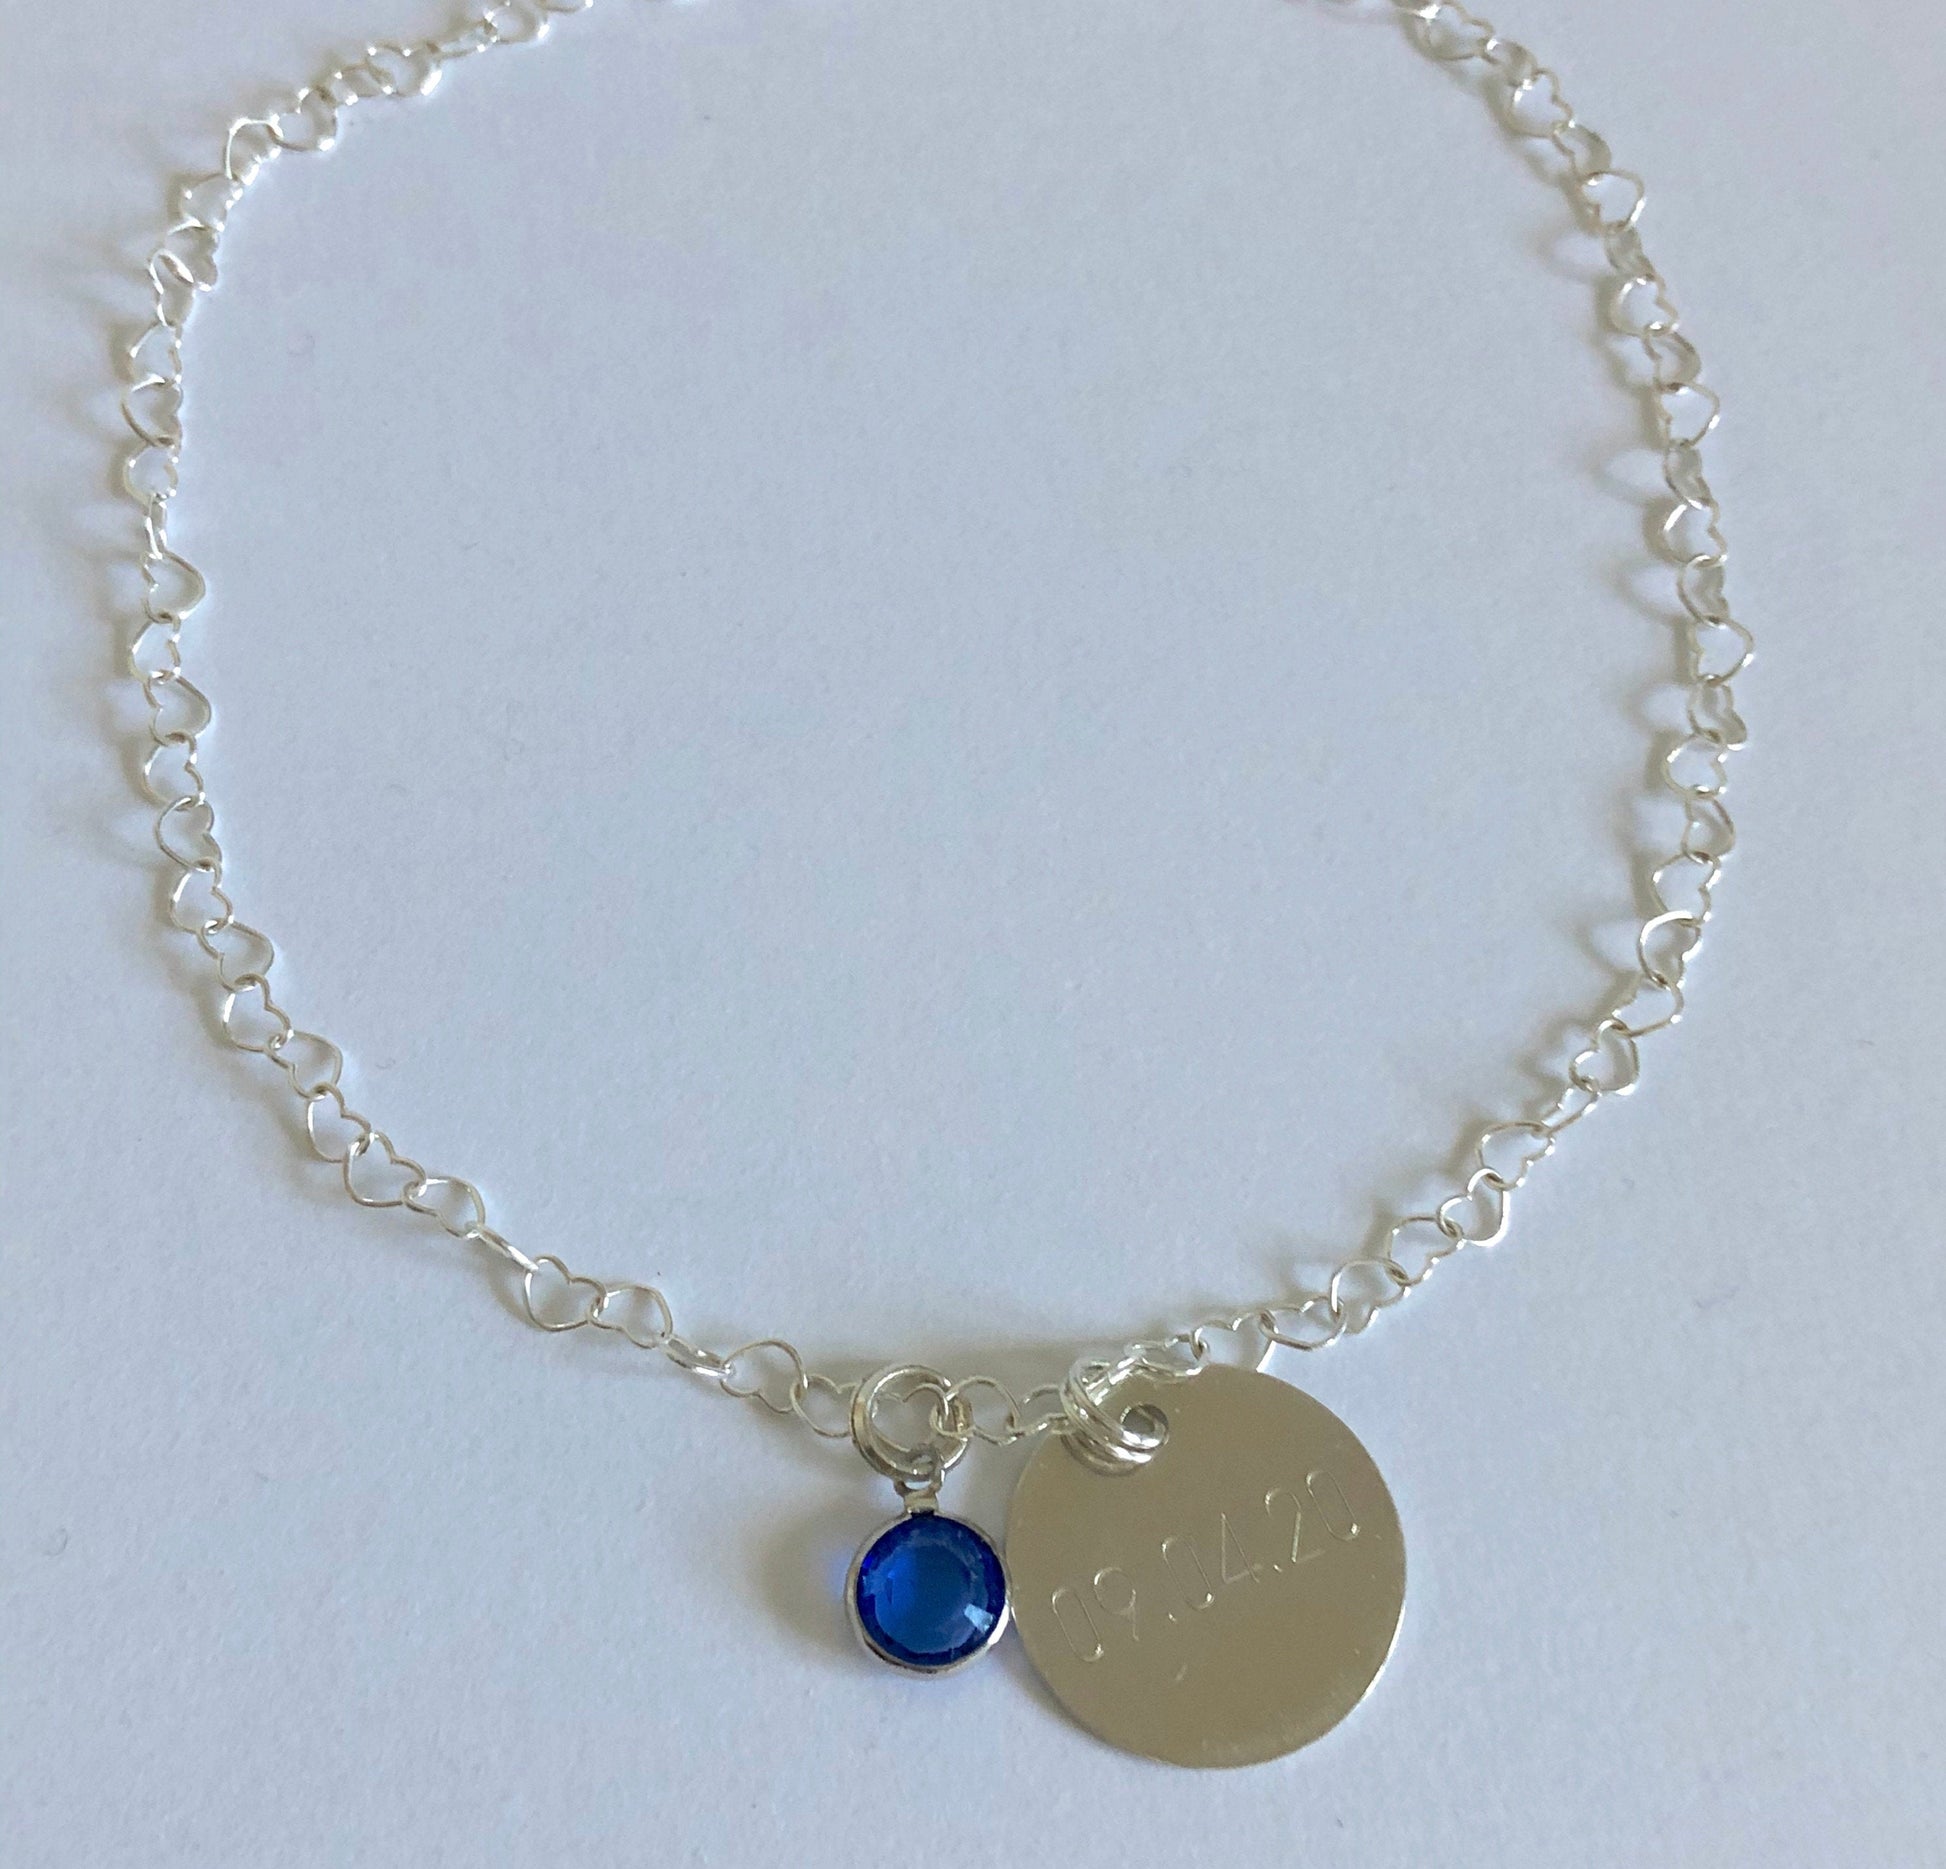 anklet with heart shaped links, blue stone and optional tag showing wedding date